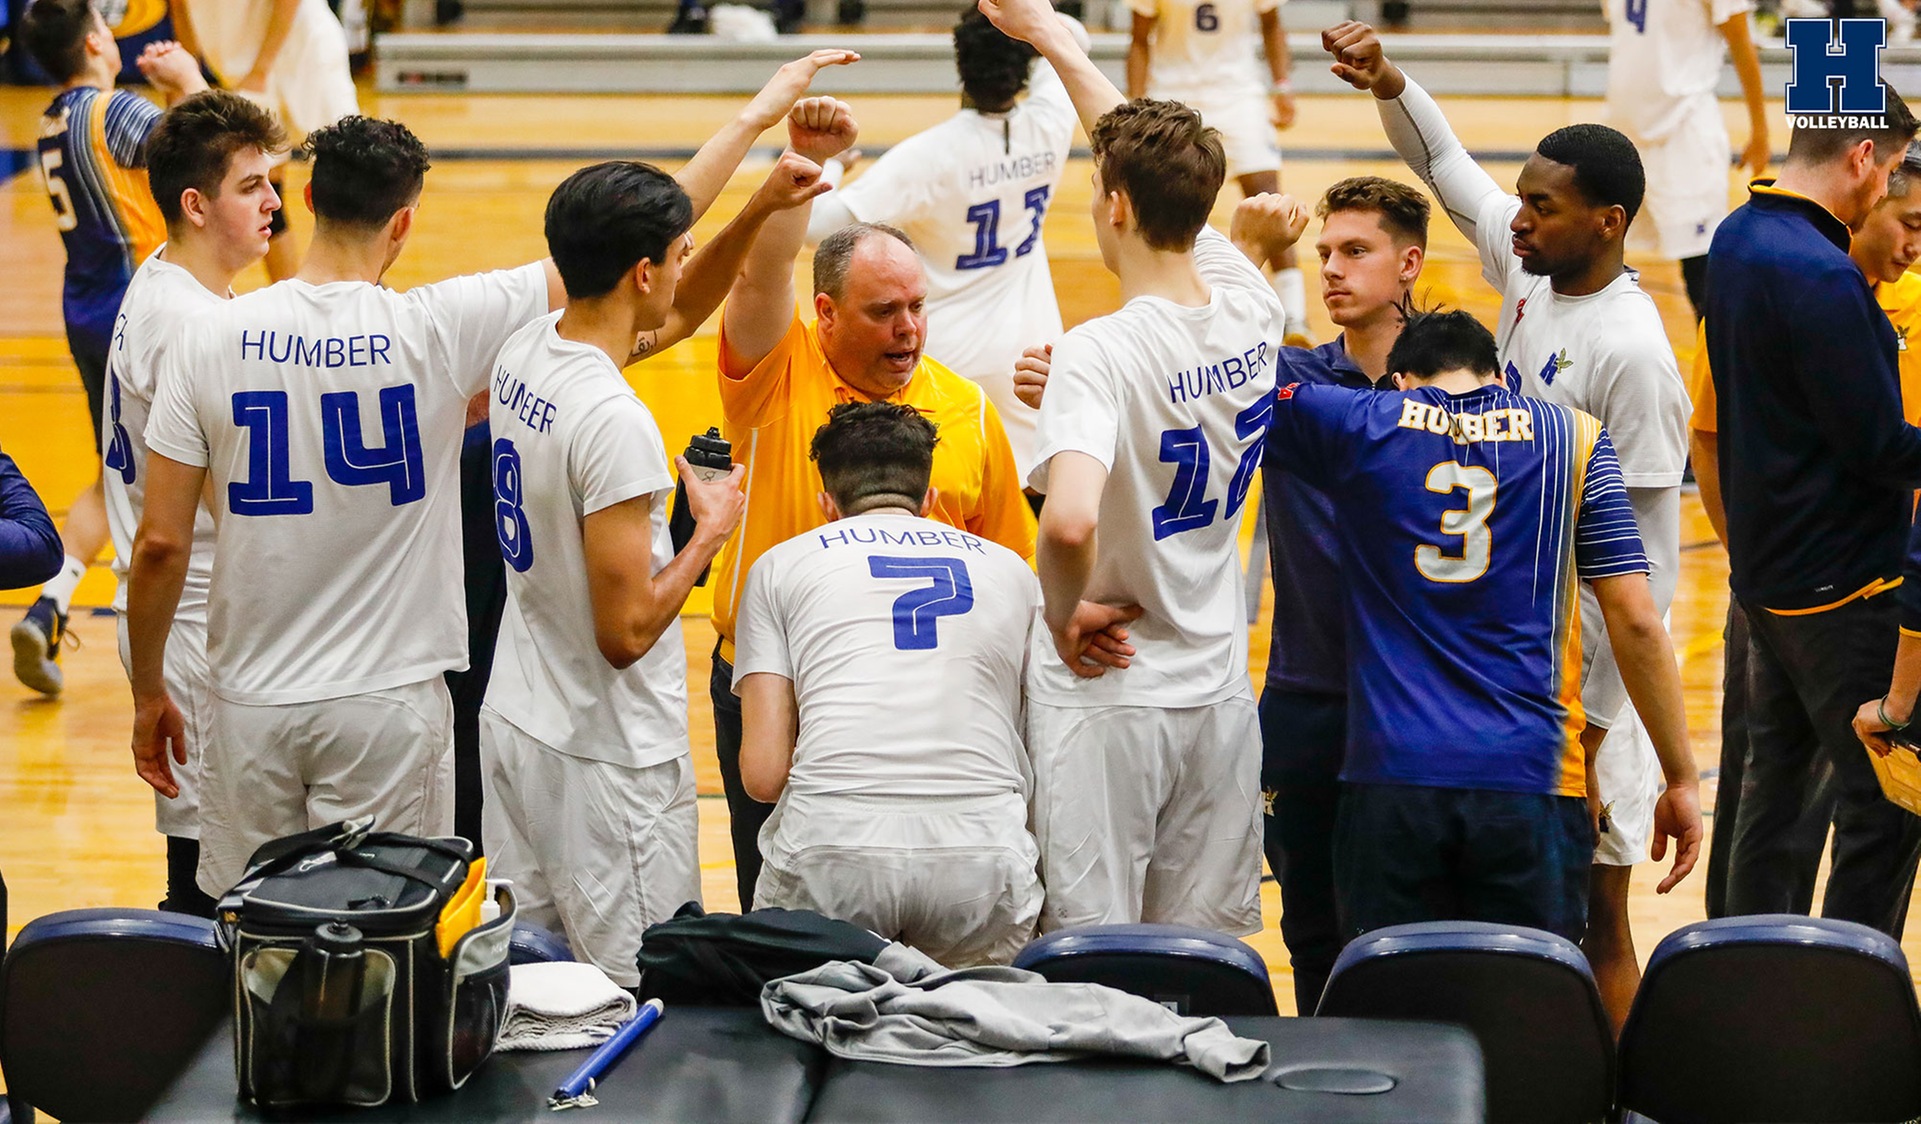 No. 1 Men's Volleyball Sweeps Fleming to Advance to Semifinal